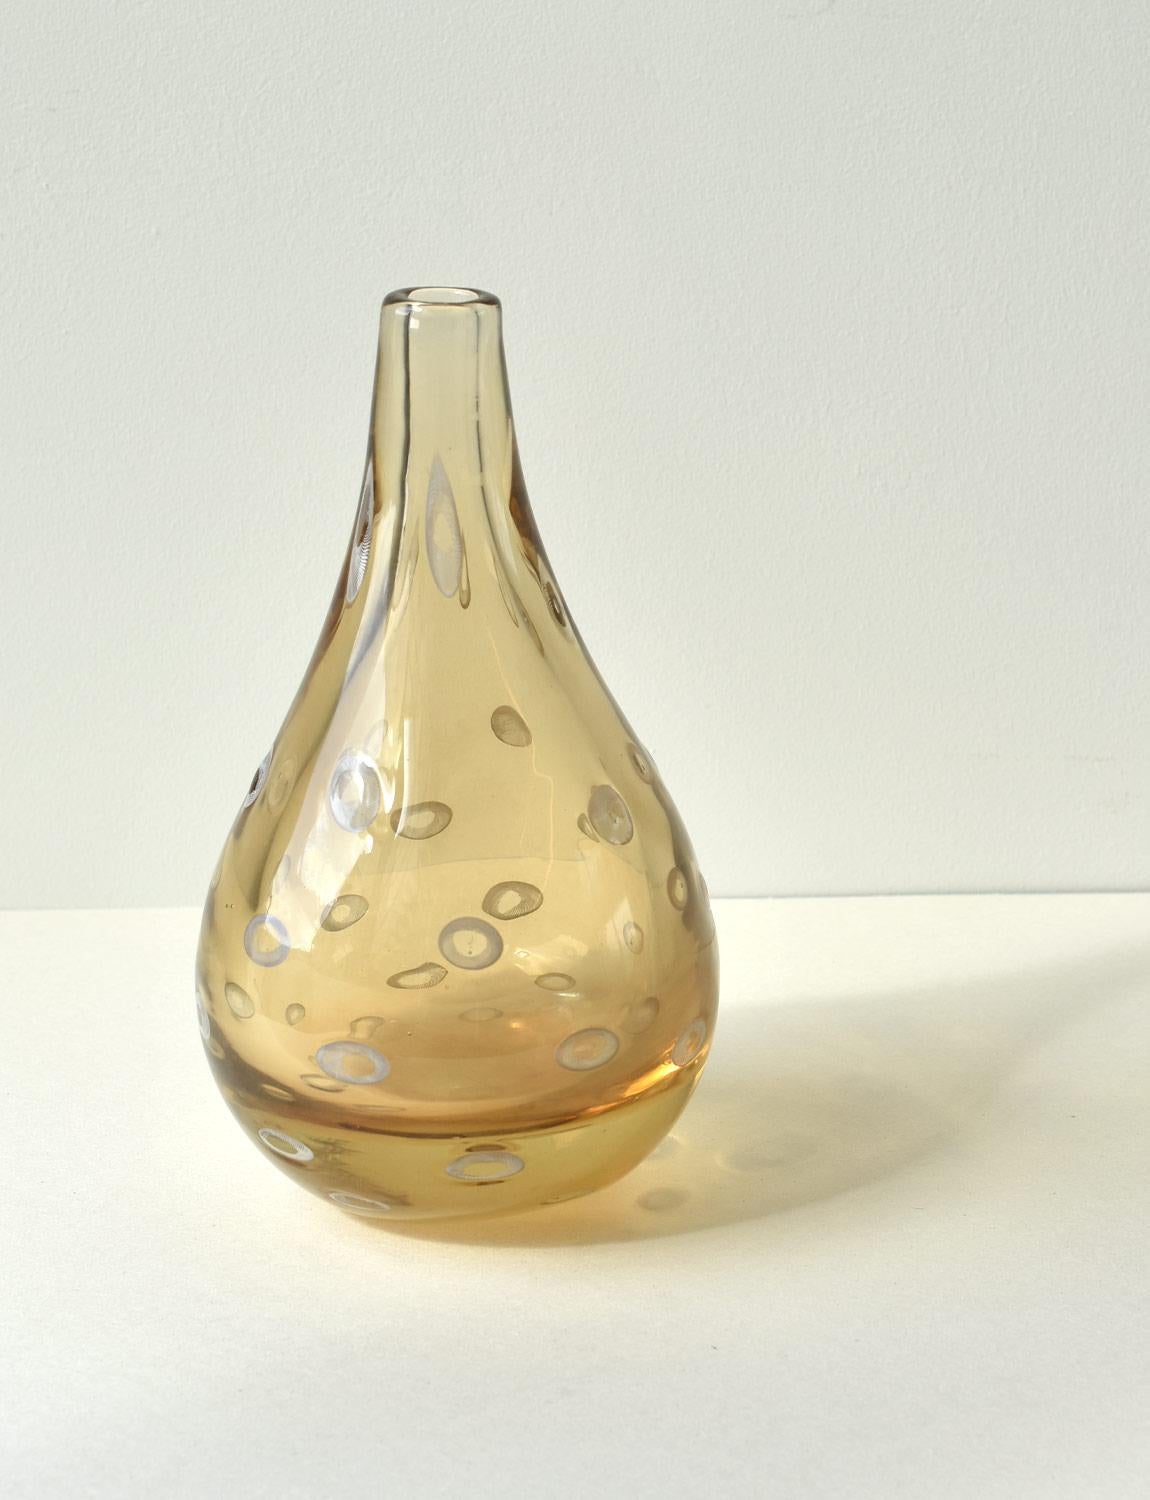 This exceptional Murano Glass vase was made in Venice by Pauly & Co in the 1950s. This vase is an exquisite peach golden colour and is decorated with white Murrine. Murrine are patterns or images made in glass canes that are revealed when the cane